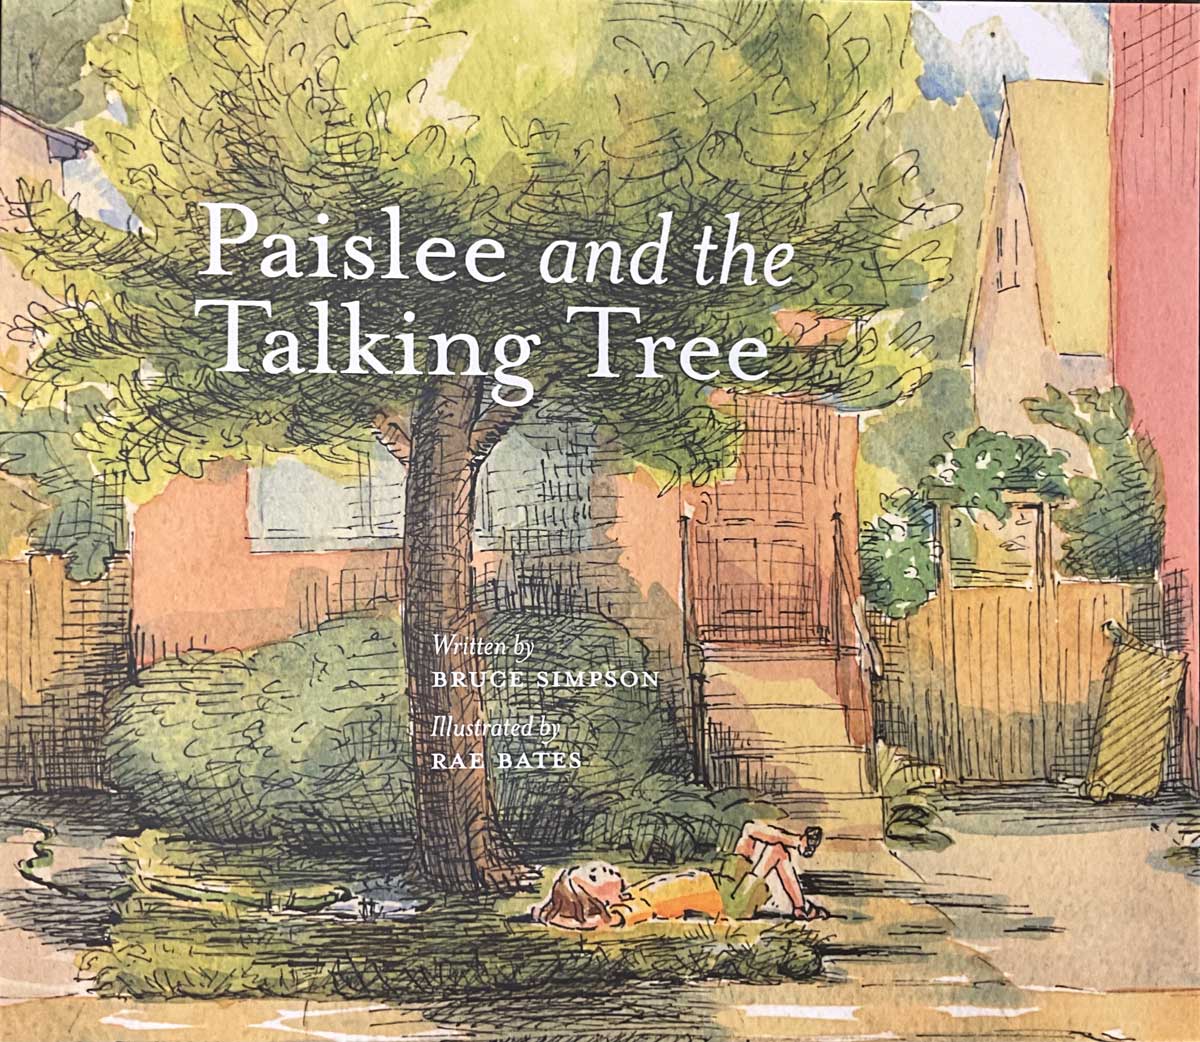 Paislee and the Talking Tree - Bruce Simpson (Illustrated by Rae Bates)